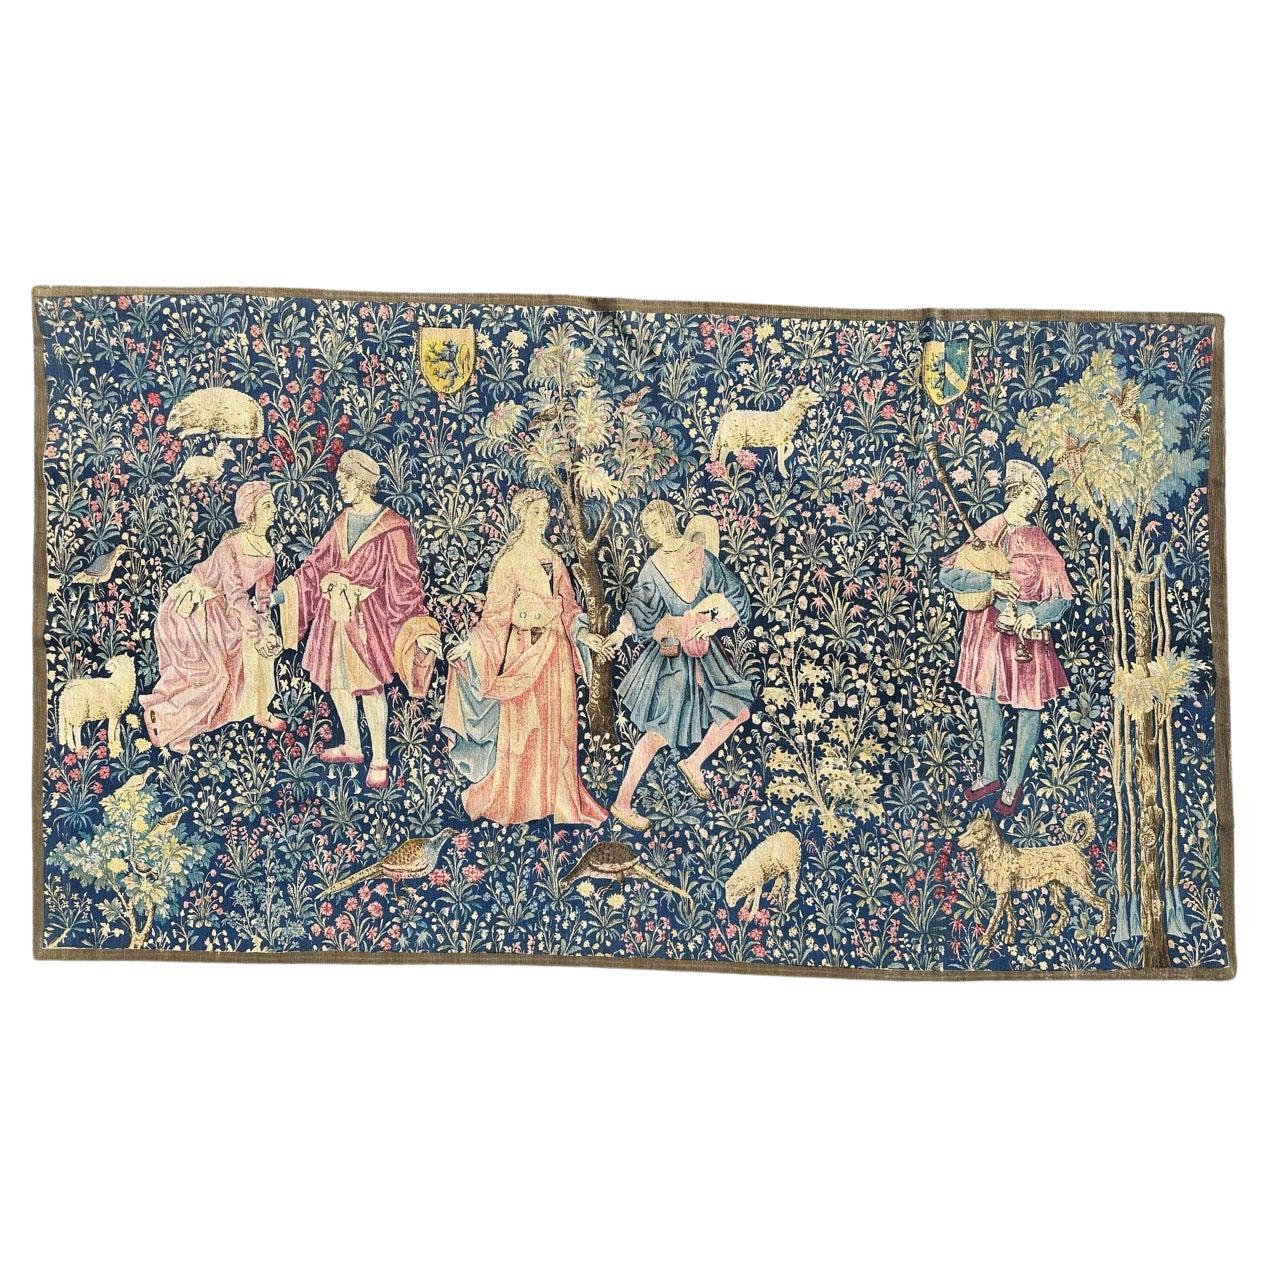 Pretty Vintage French Hand Printed Tapestry Titled "the danse" For Sale